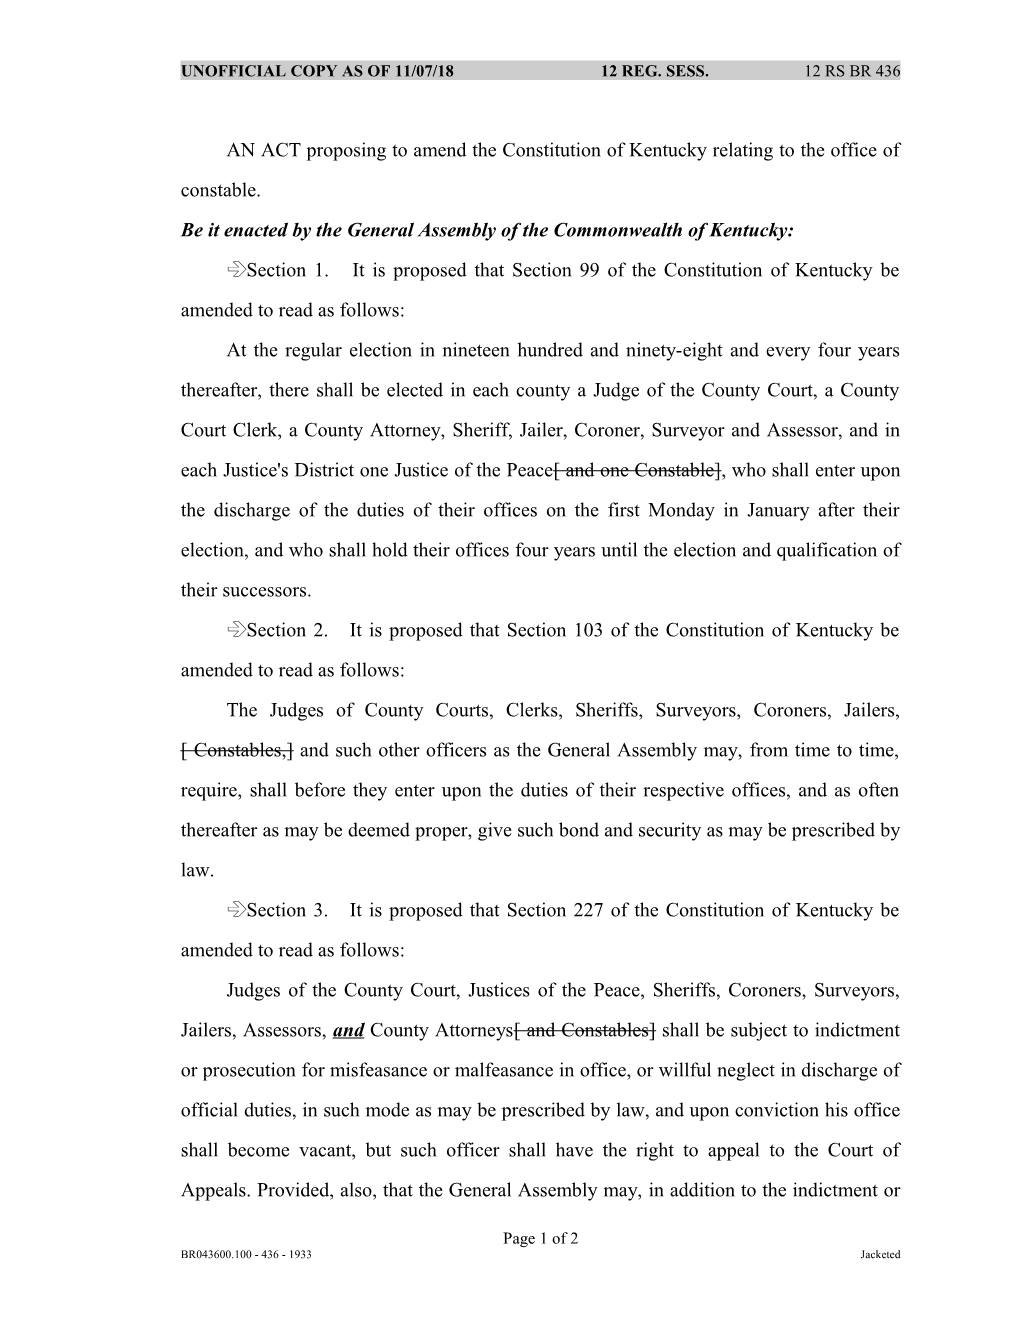 AN ACT Proposing to Amend the Constitution of Kentucky Relating to the Office of Constable